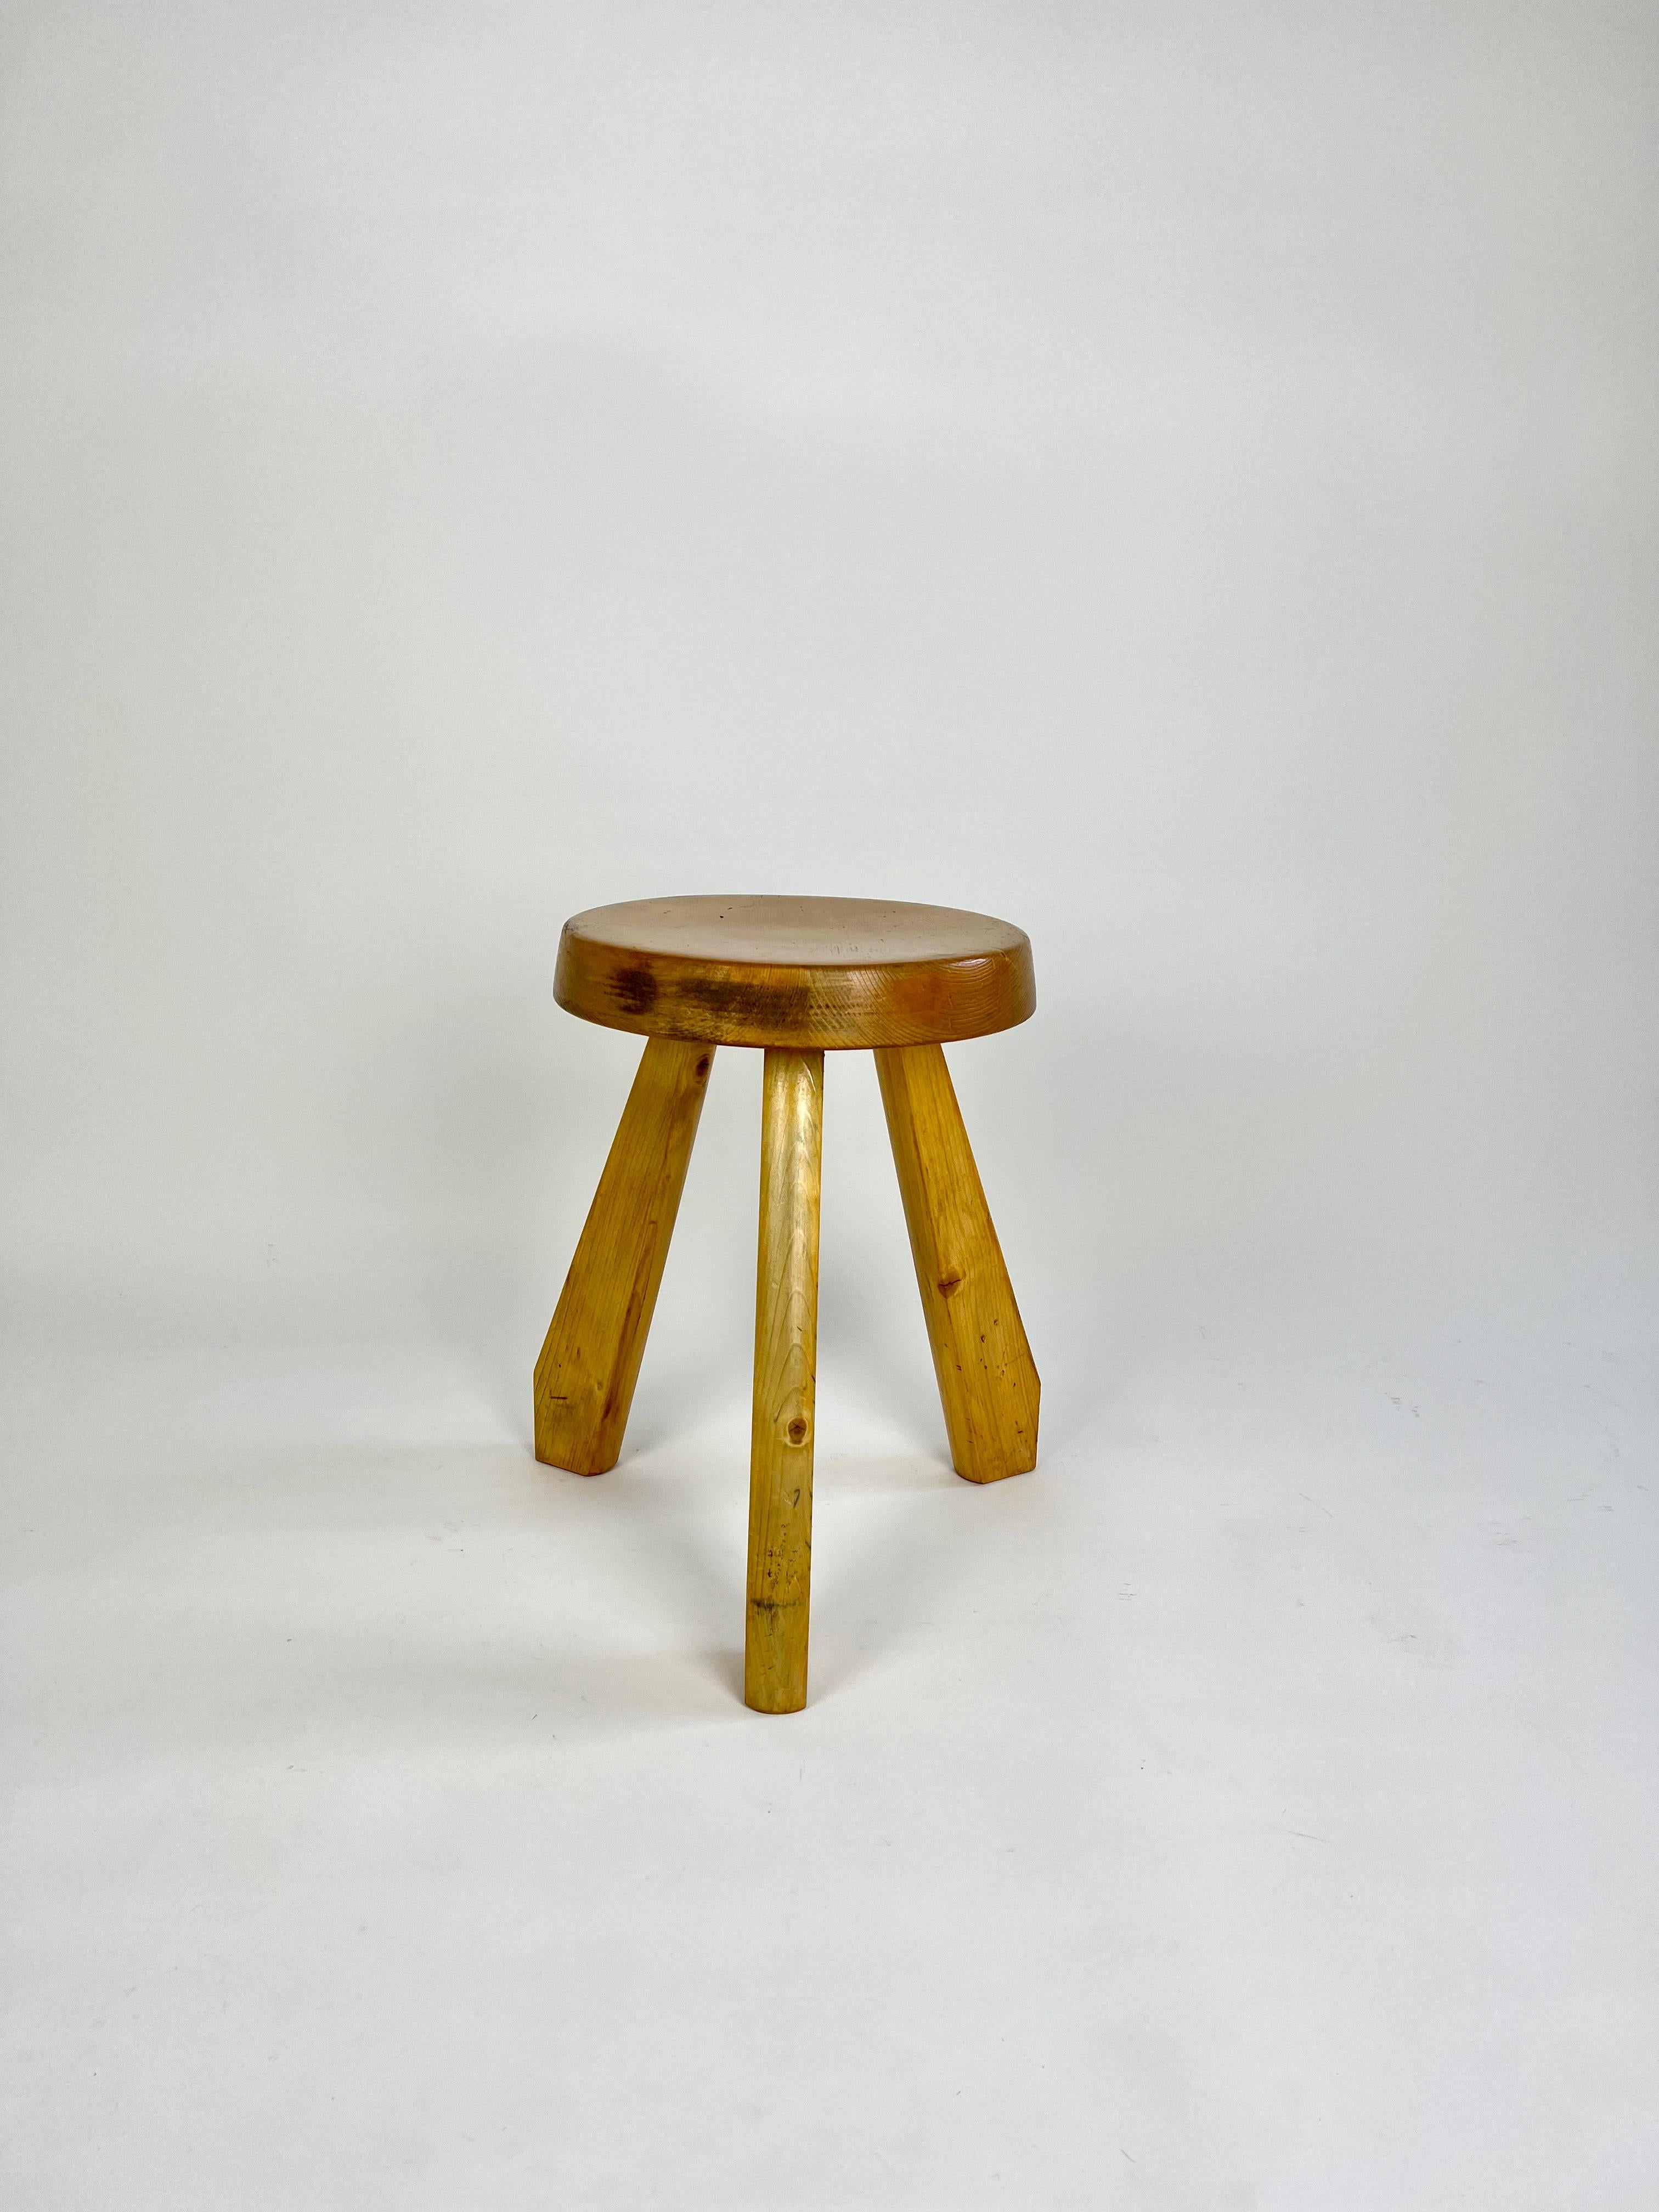 Rare pine Sandoz stool by Charlotte Perriand, circa 1960 from Les Arcs.

The stool was sourced from a chalet clearance in the Haute Savoie region of France.

Original condition, with signs of age and use, age related wear as pictured. Structurally